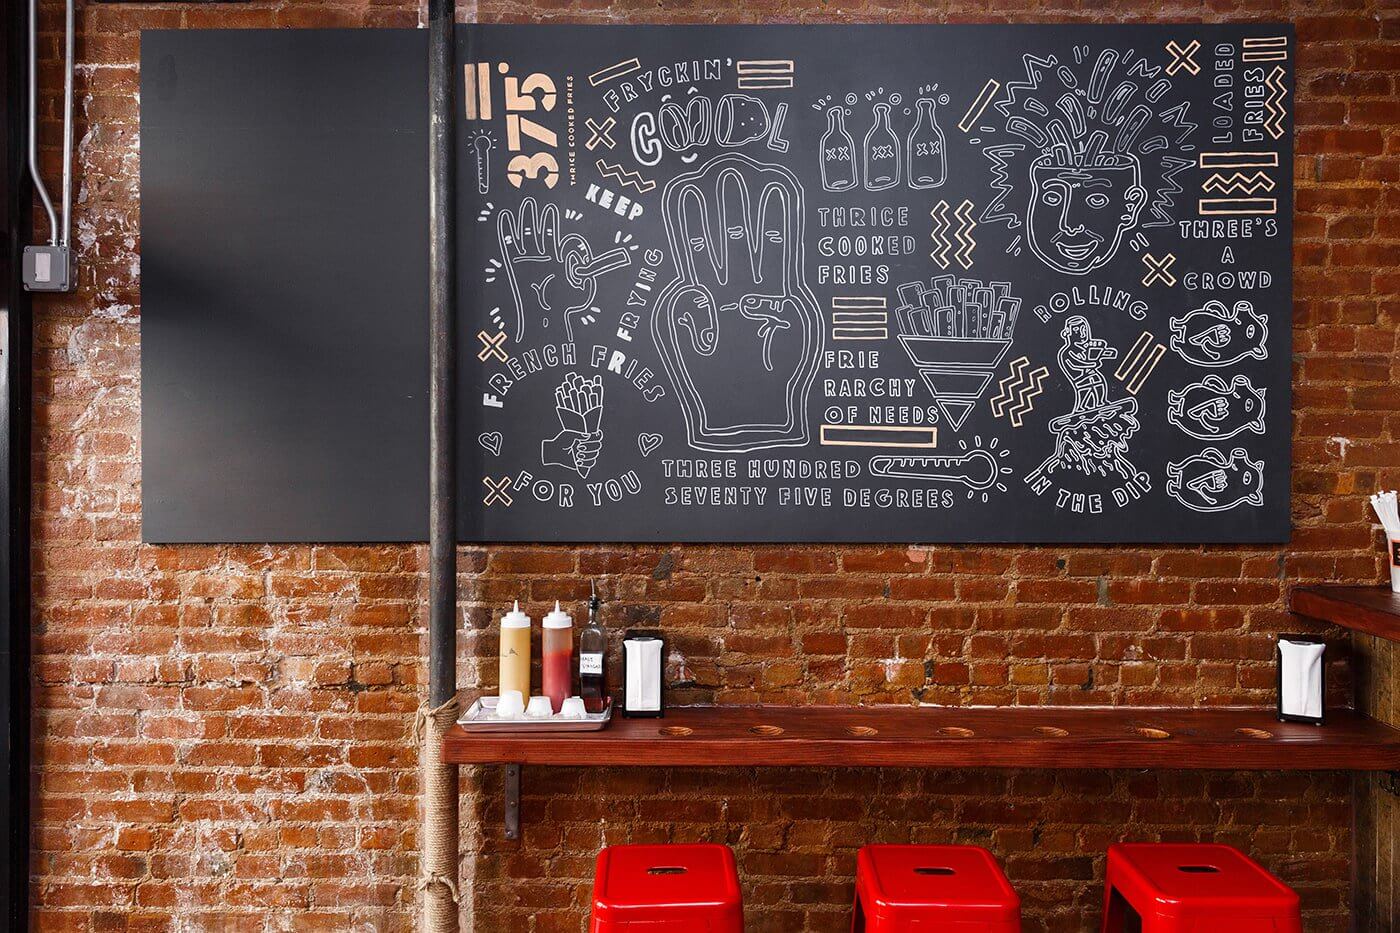 Witty illustrations and pattern mural design for food and beverage brand 375 Chicken and Fries